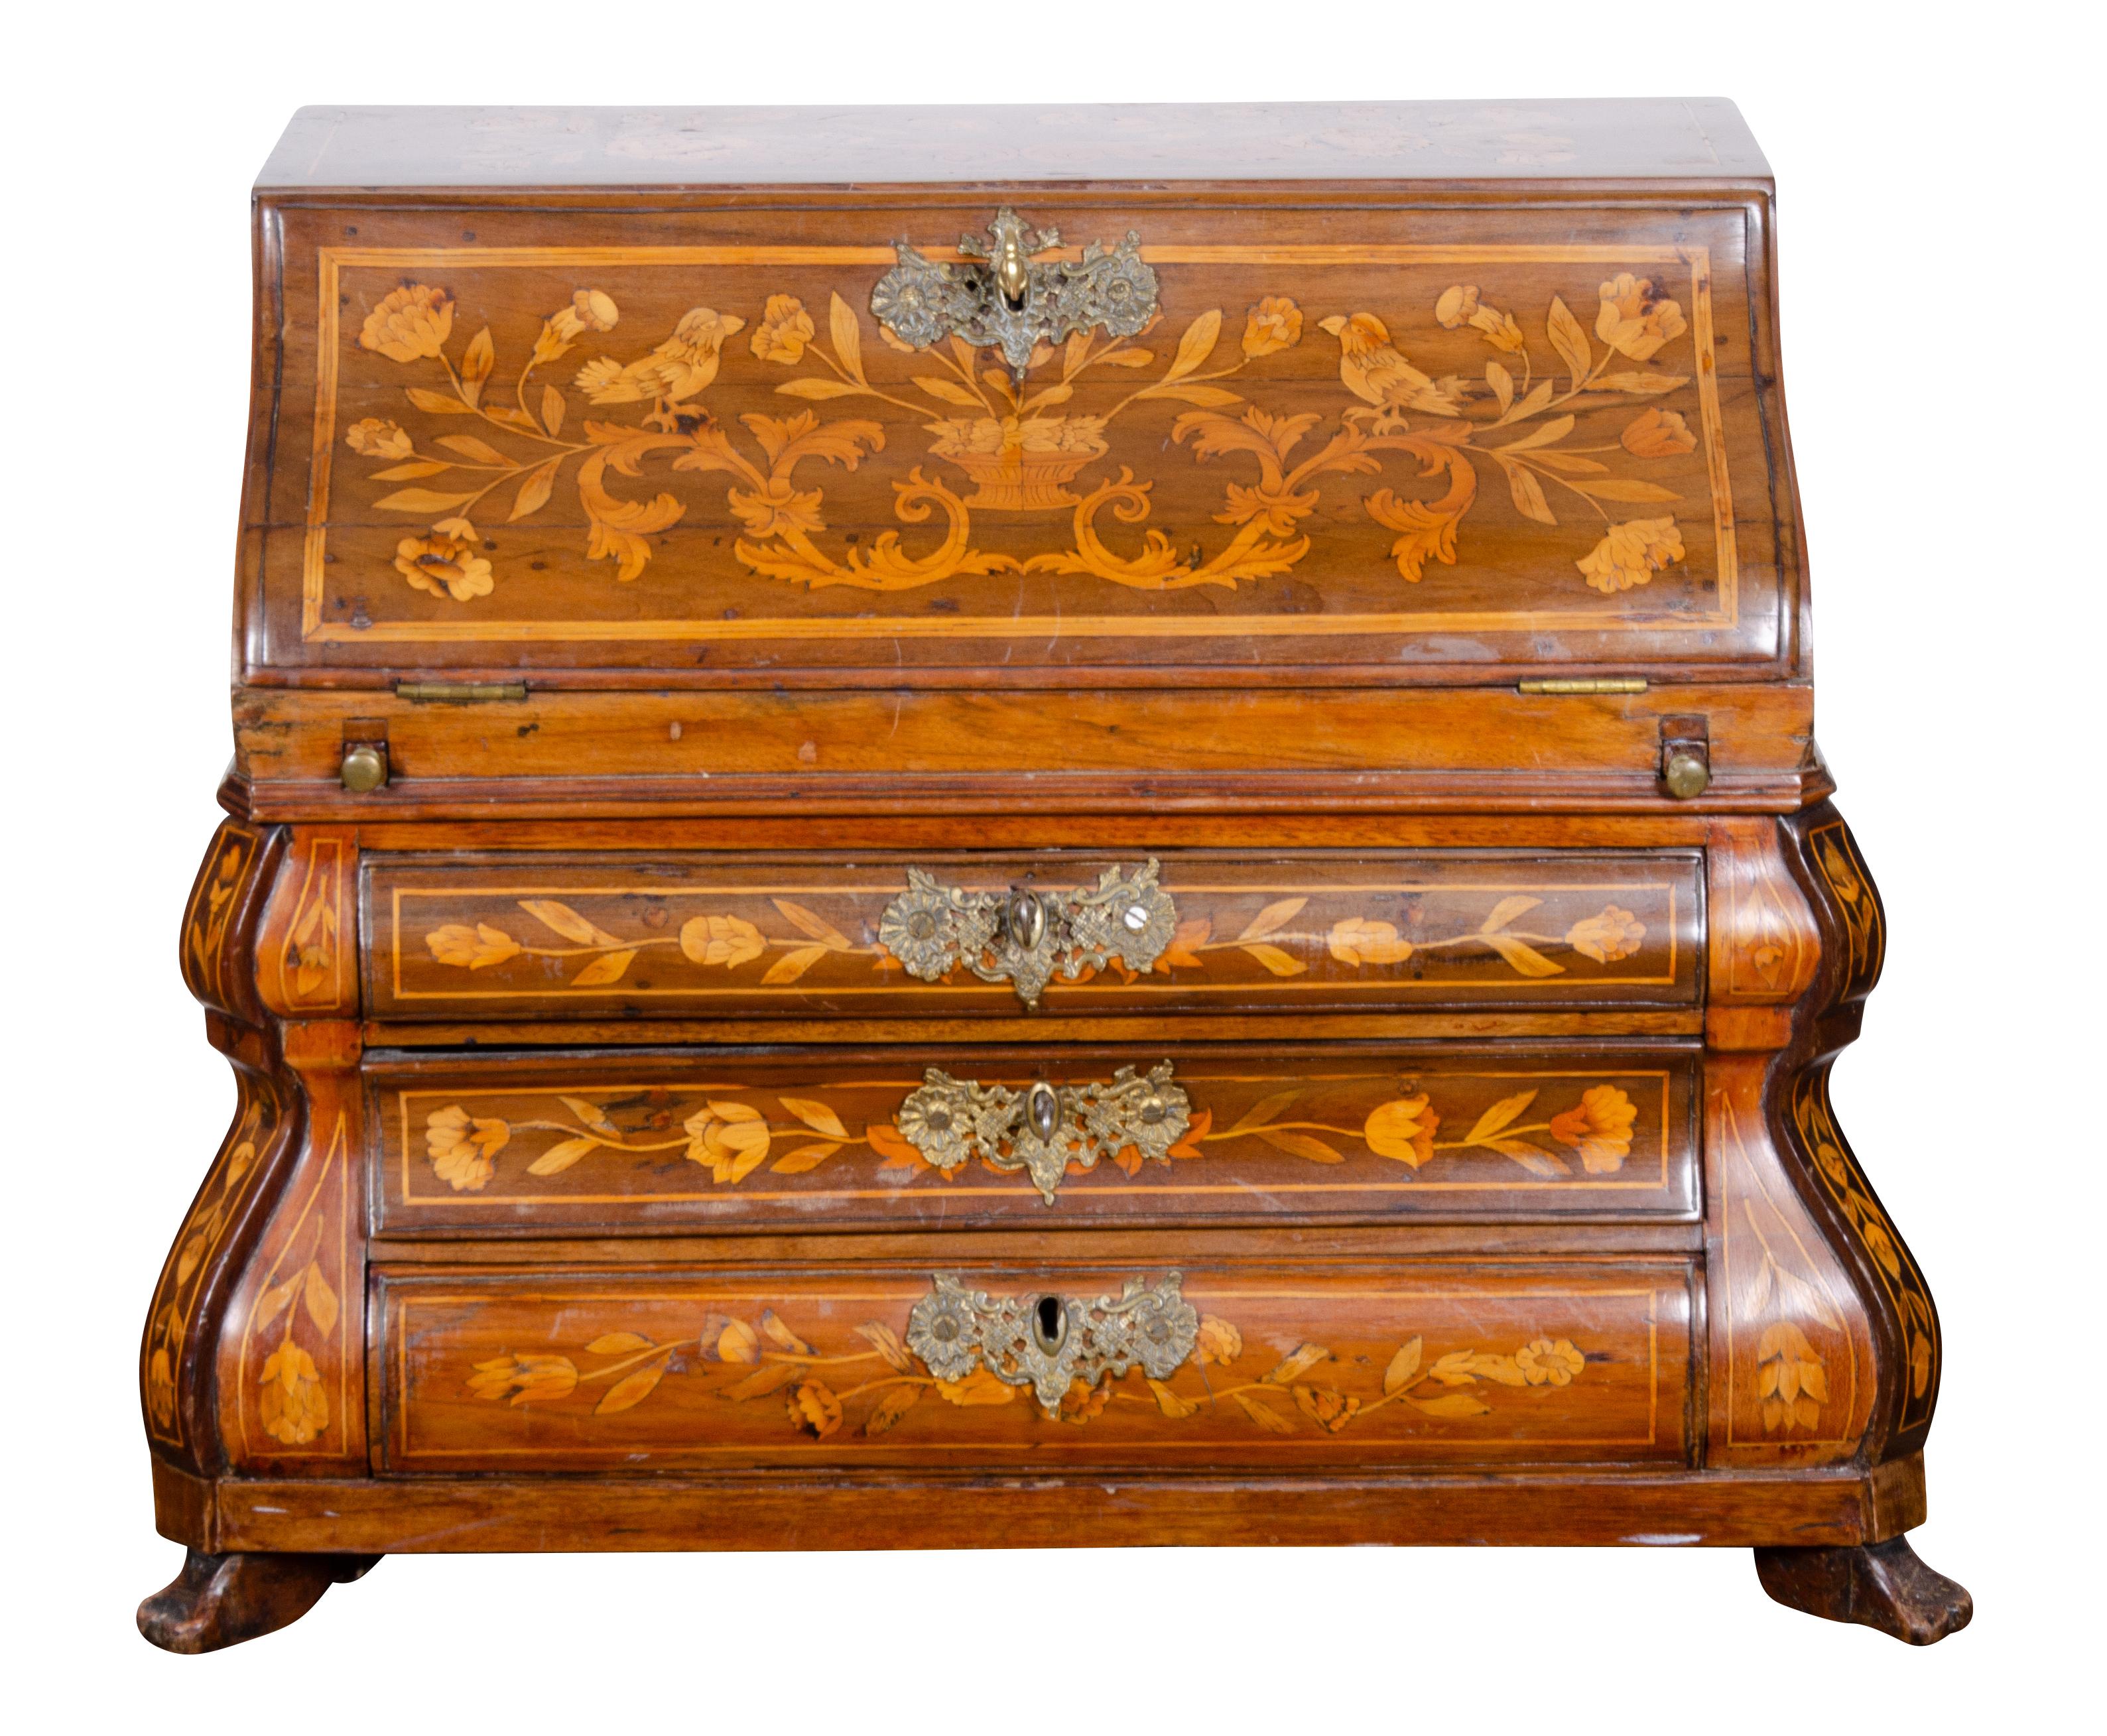 With curved lid opening to a fitted interior with three drawers below and bracket feet. Beautifully crafted in a bombe form. Much time and skill went into making this piece. Sometimes these were used to show the talent of a craftsman or as a sample.